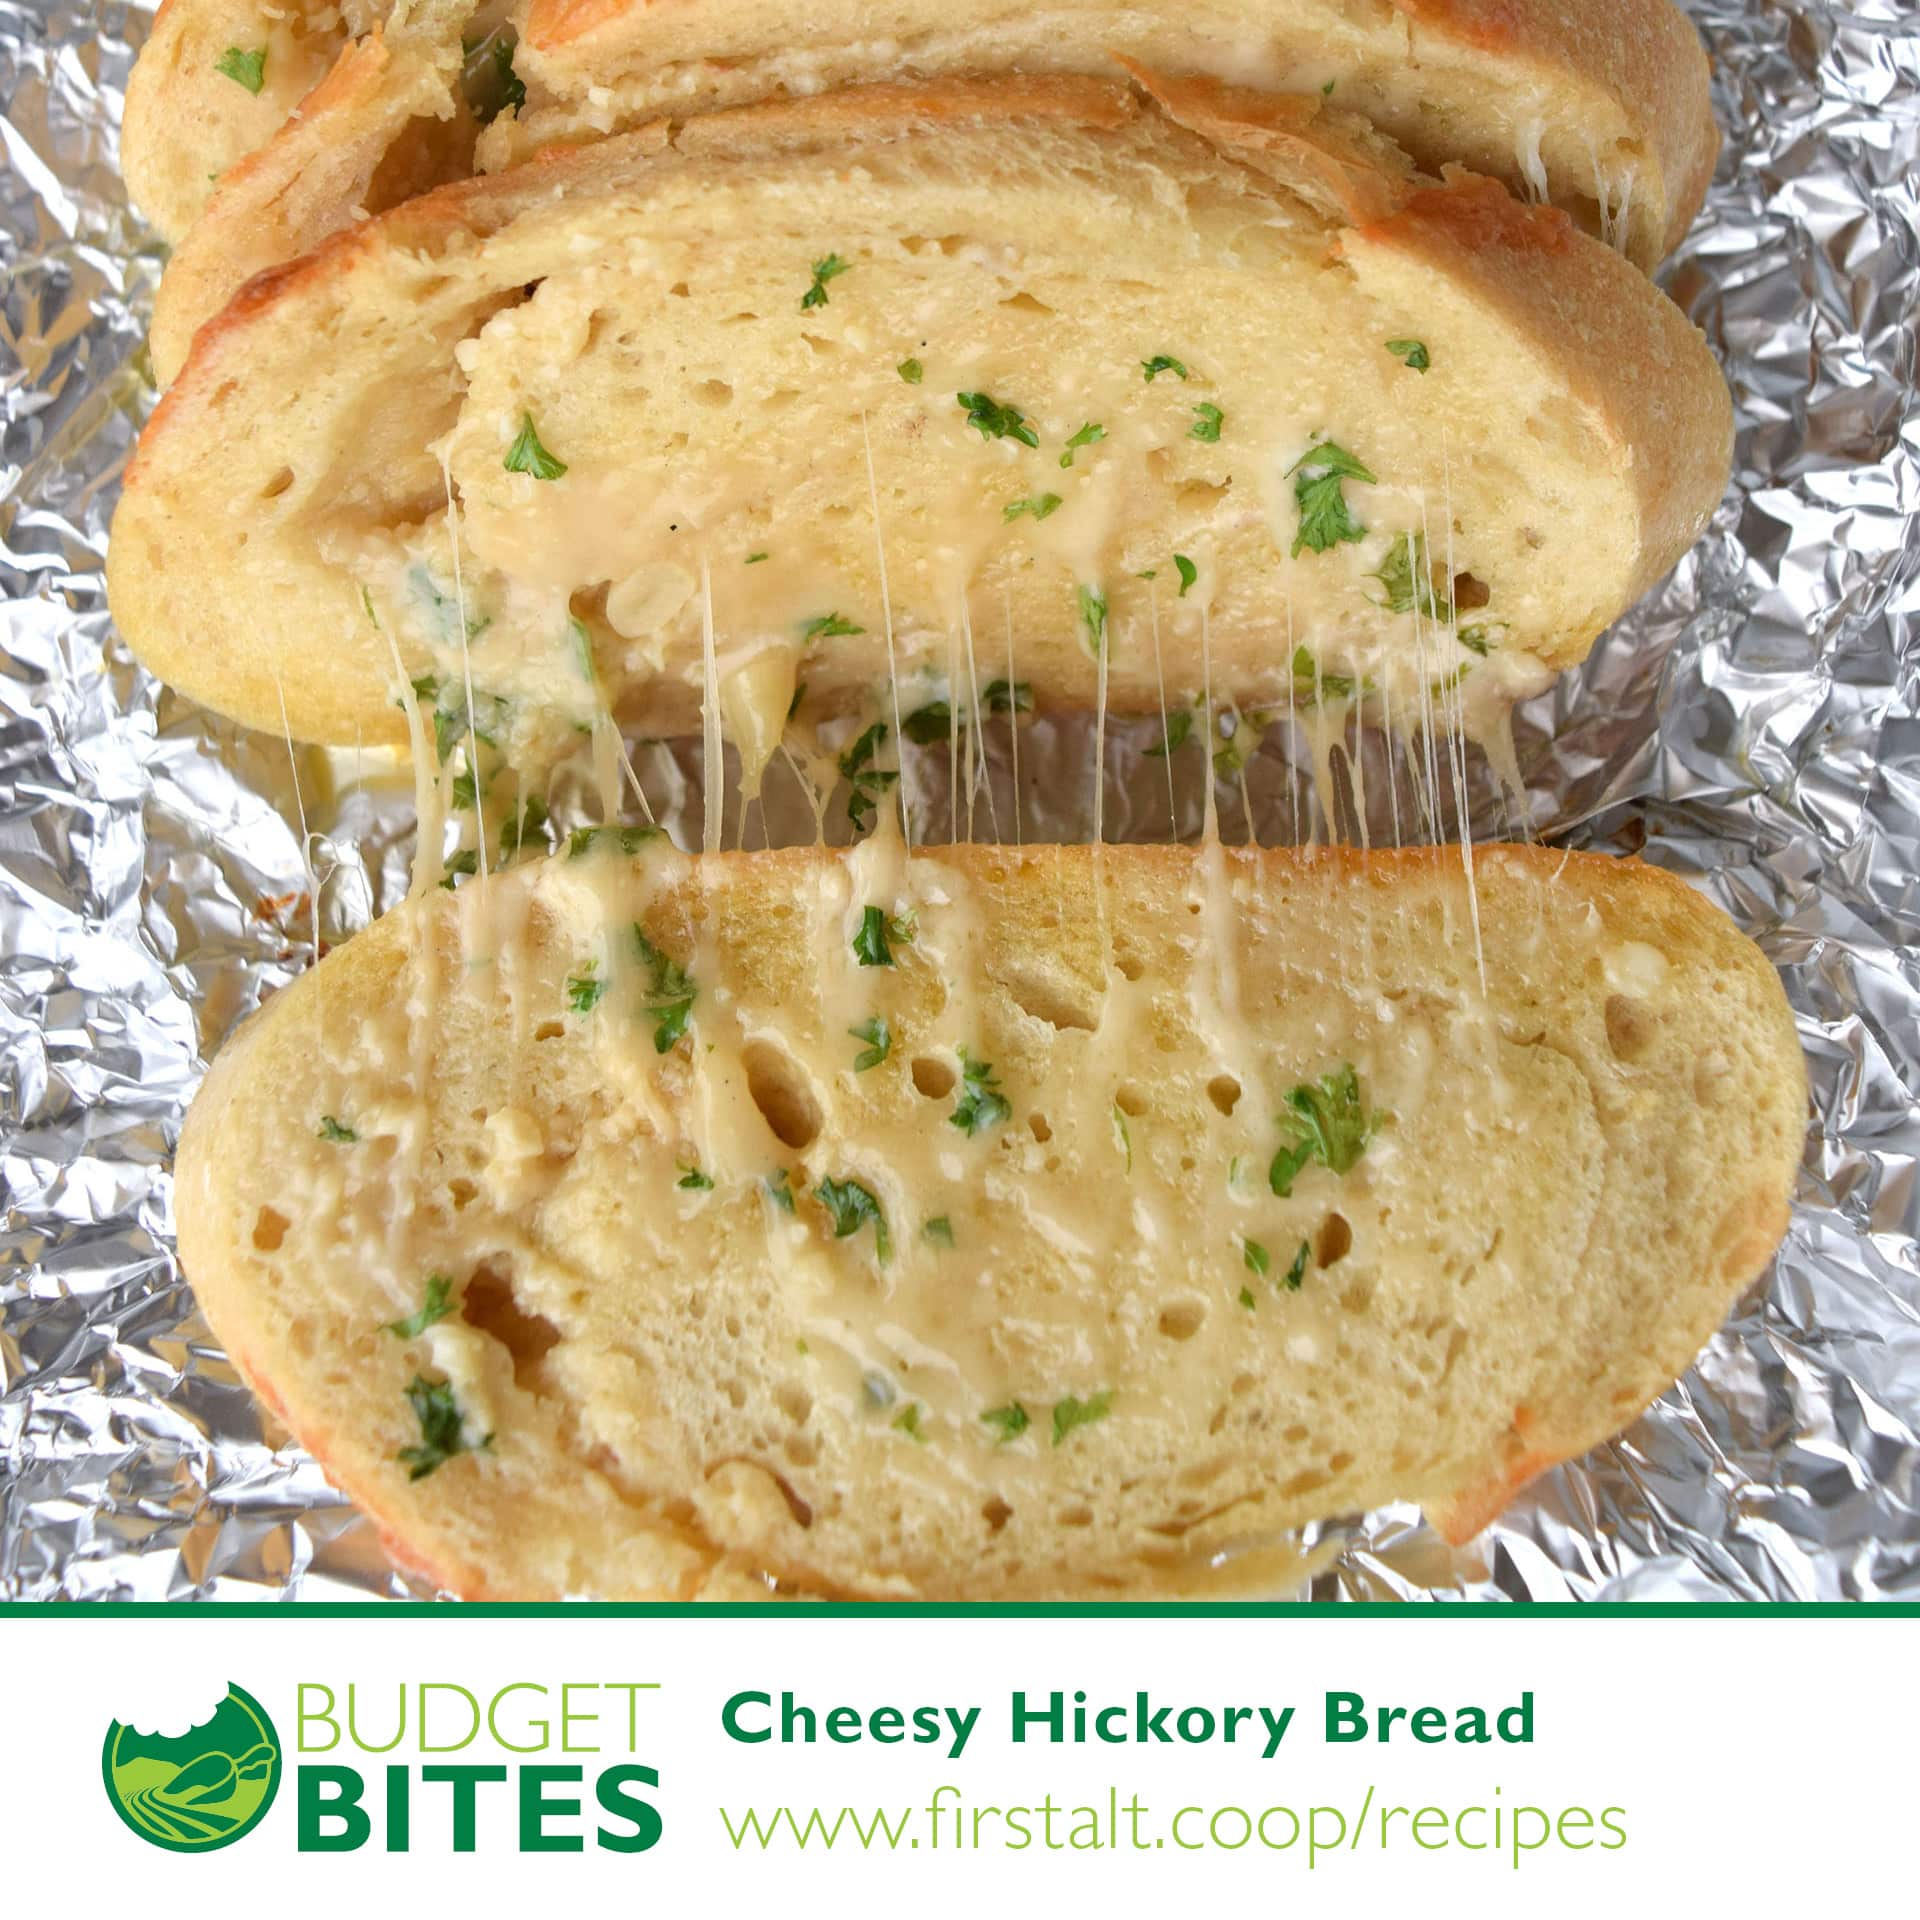 Budget Bites Online – Cheesy Hickory Bread – Post